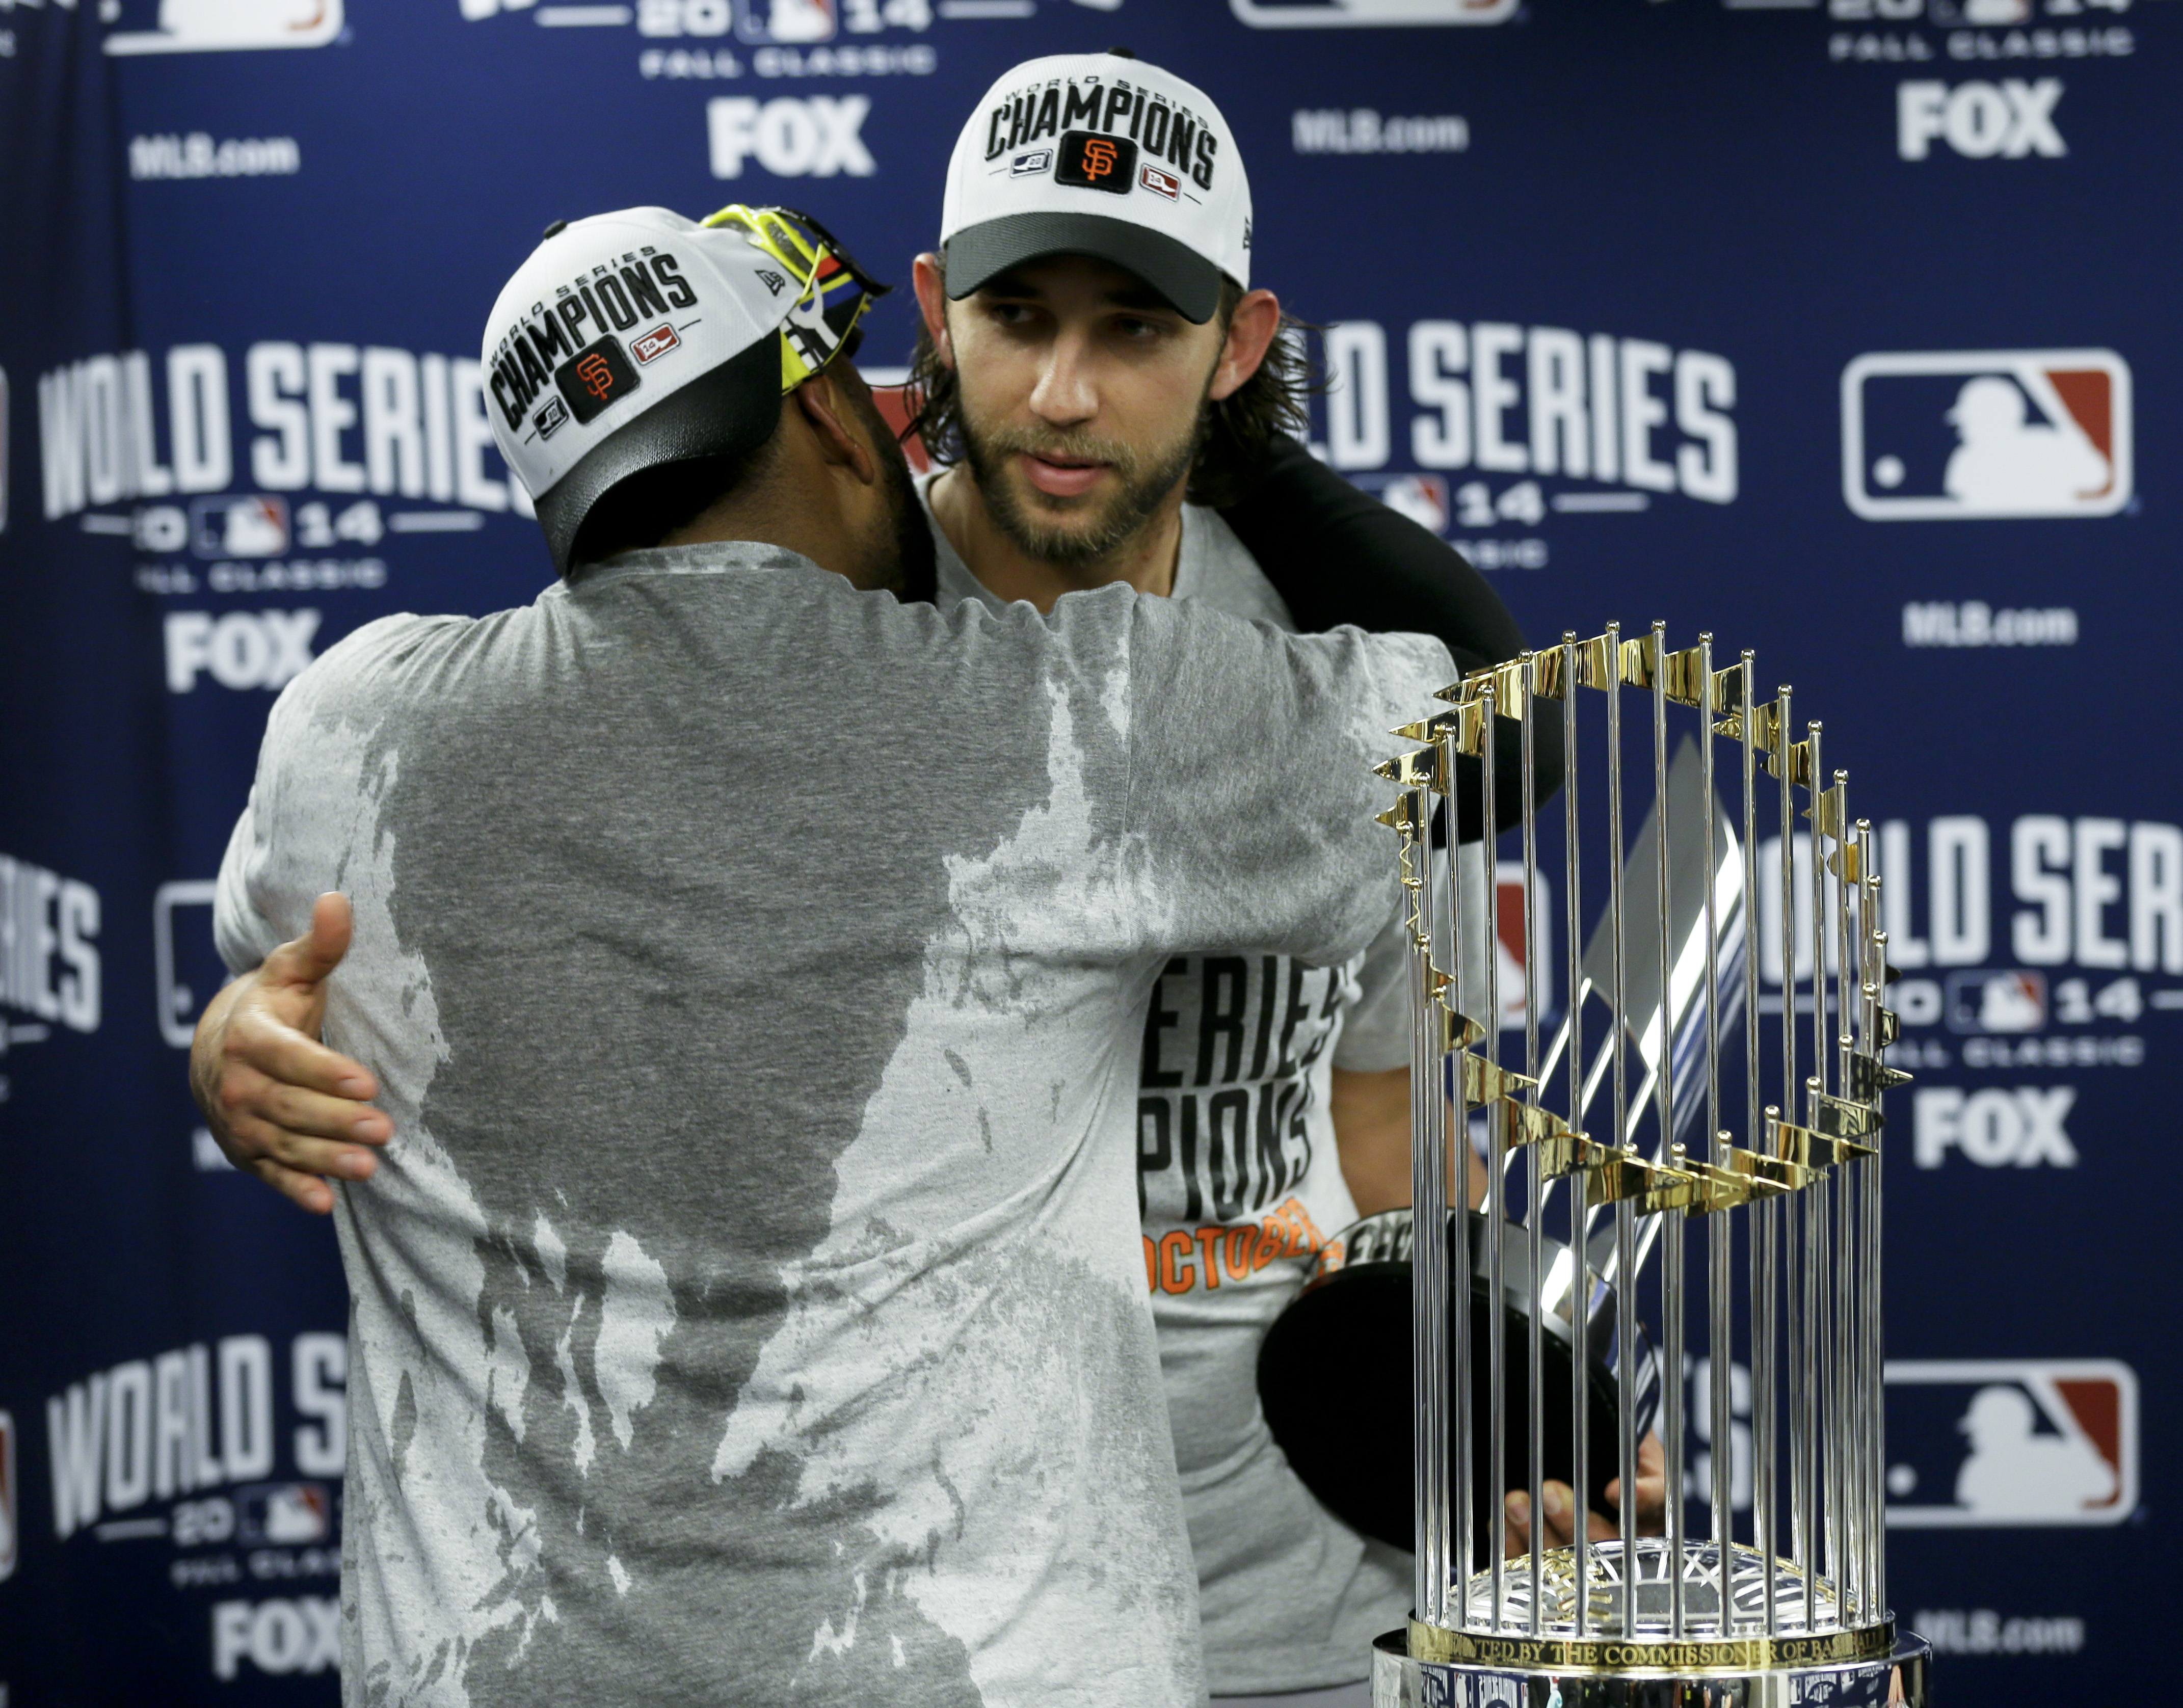 Mad about Bumgarner: The greatest World Series pitching performance ever?